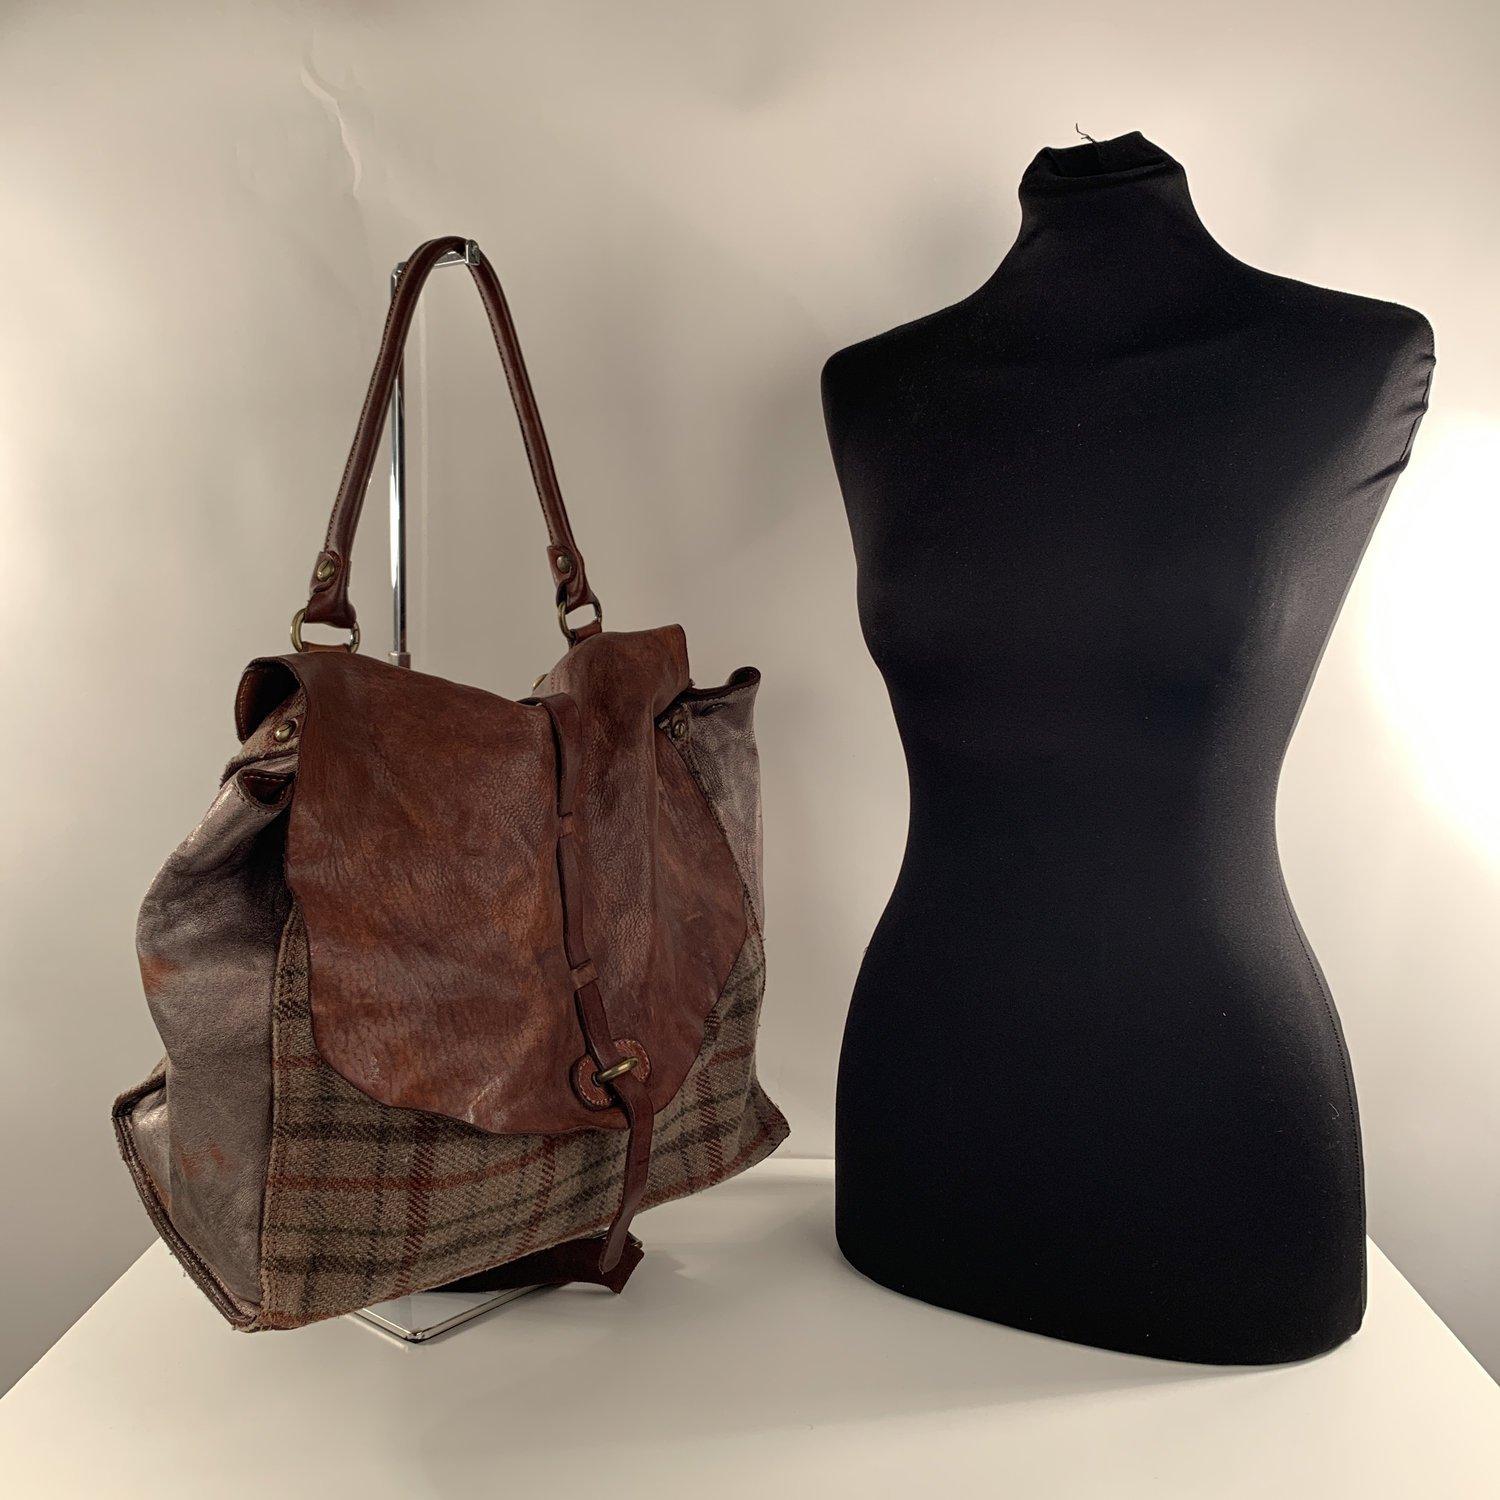 MATERIAL: Wool, Leather COLOR: Brown MODEL: Tote GENDER: For Her SIZE: Large Condition B - VERY GOOD Some normal wear of use on leather. Some pilling on wool fabric. Some normal wear of use on the internal lining Measurements BAG HEIGHT: 13 inches -